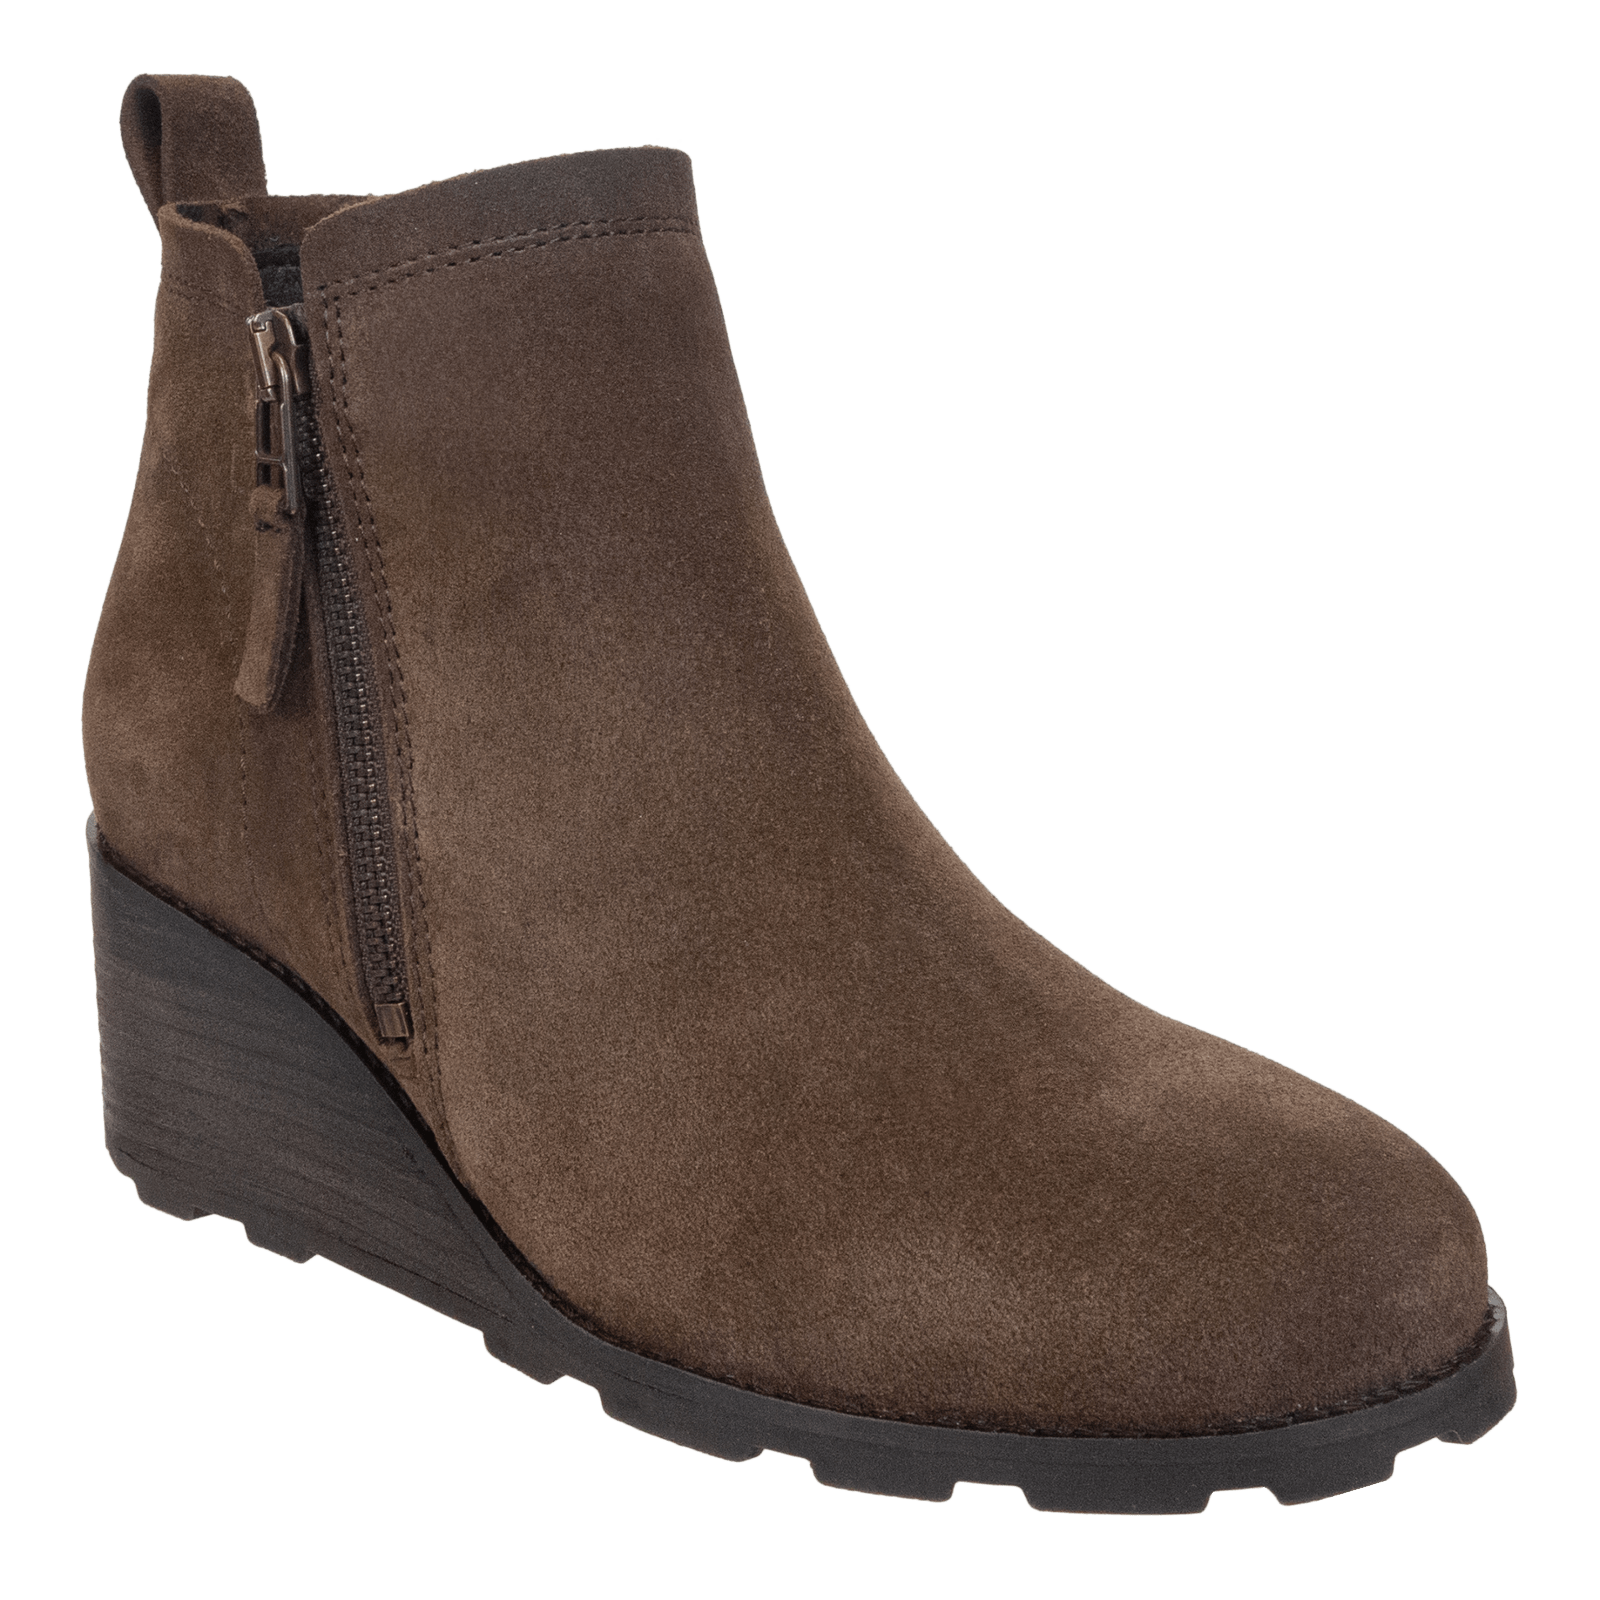 STORY in BROWN Wedge Ankle Boots